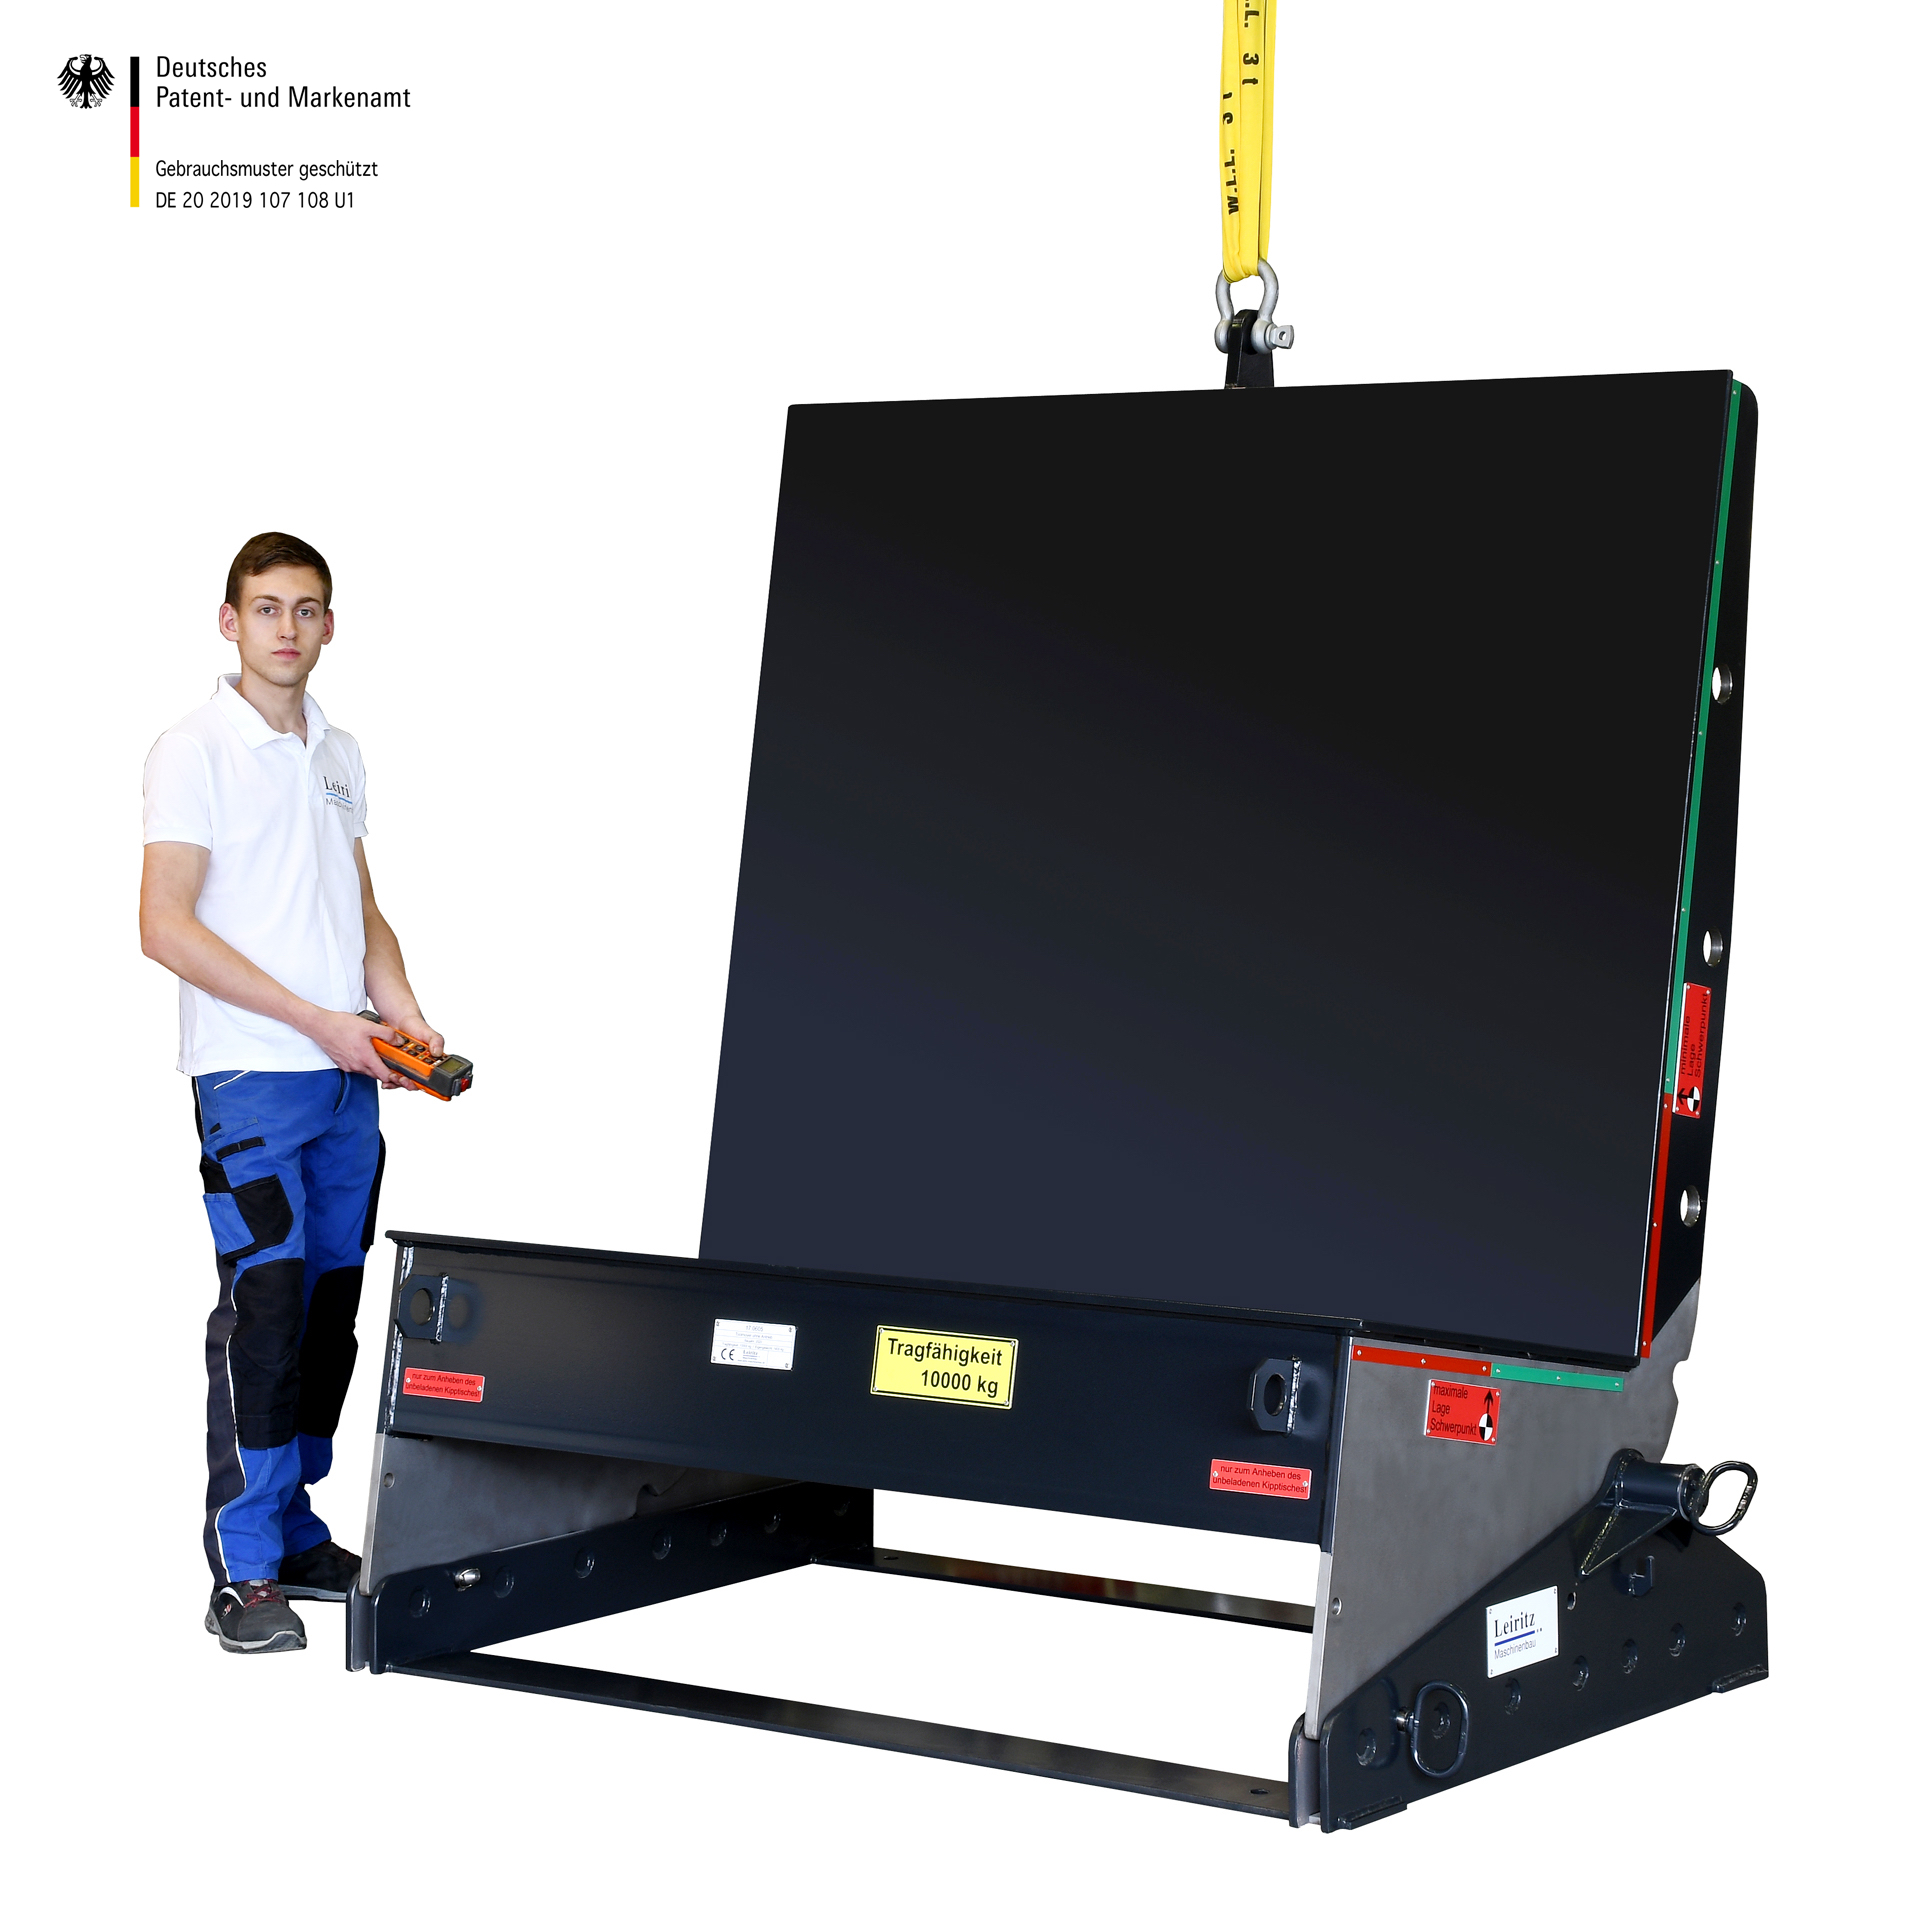 Leiritz Turnover Device and Tool Mover from Germany/Bavaria.